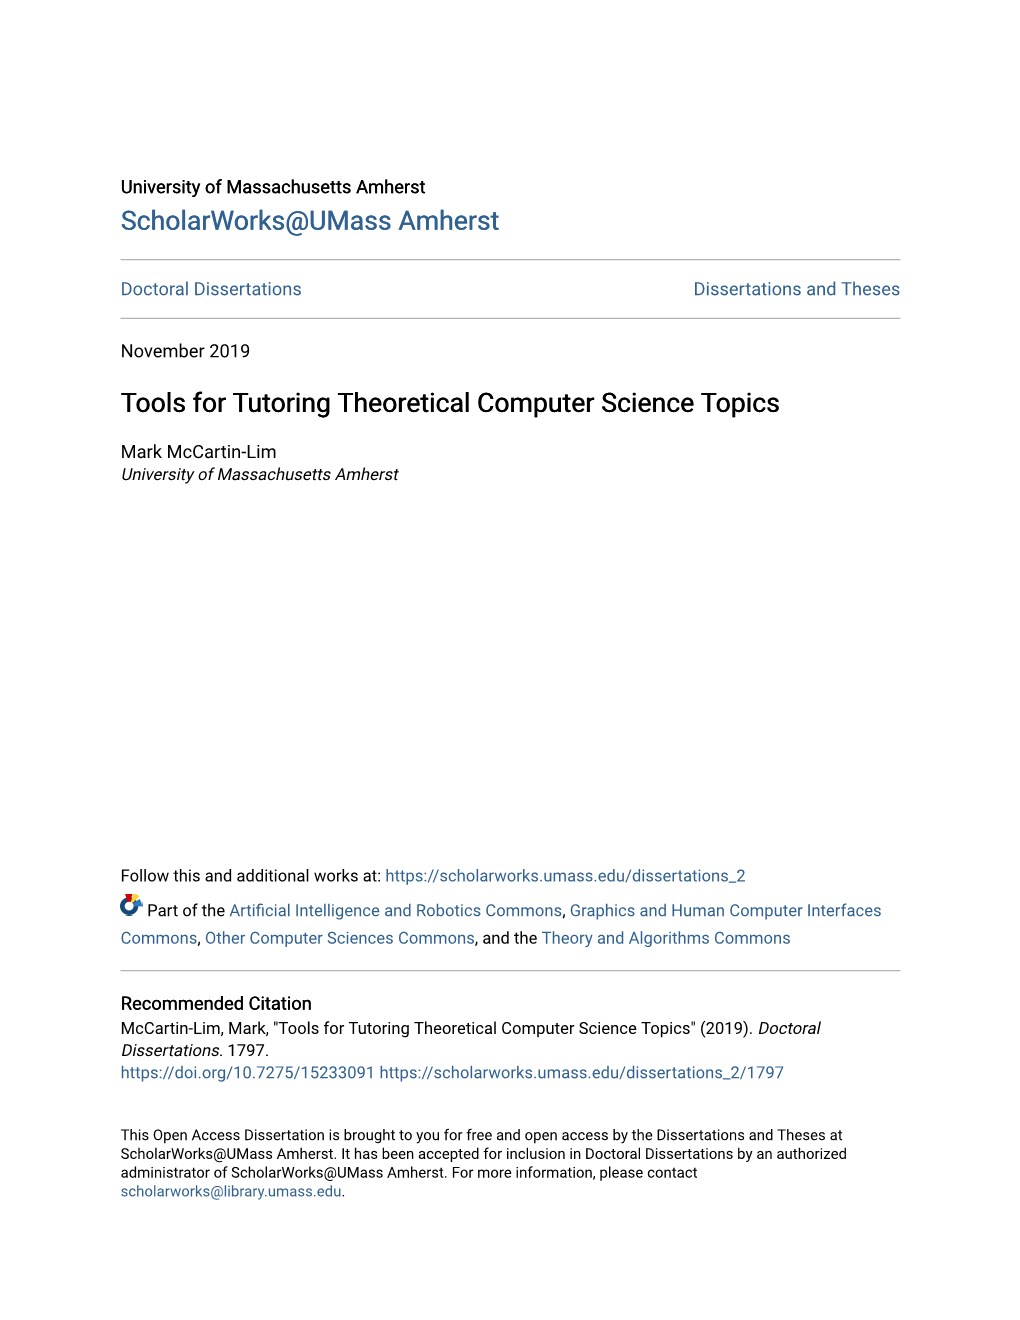 Tools for Tutoring Theoretical Computer Science Topics